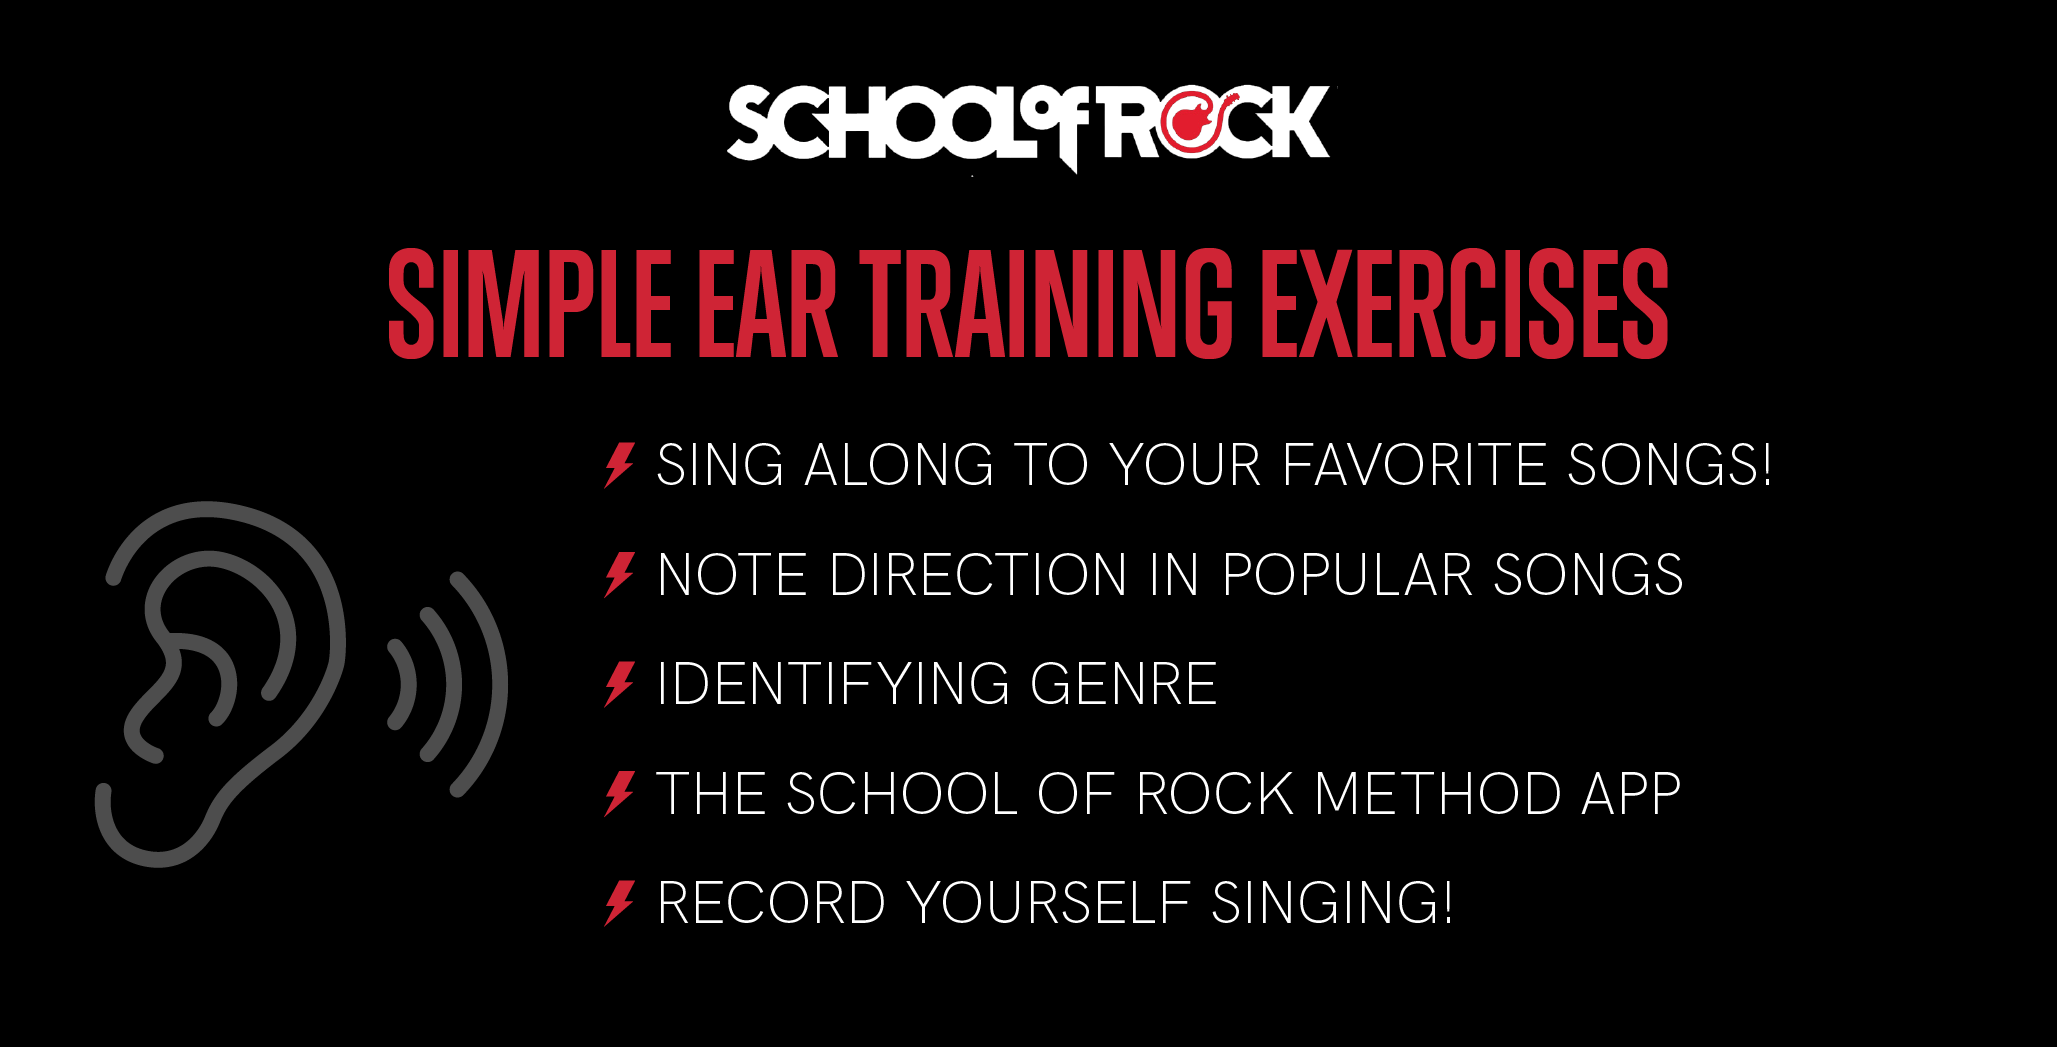 Simple ear training exercises: Sing along to your favorite songs, note direction in popular songs, identifying genre, the School of Rock Method App, and record yourself singing.